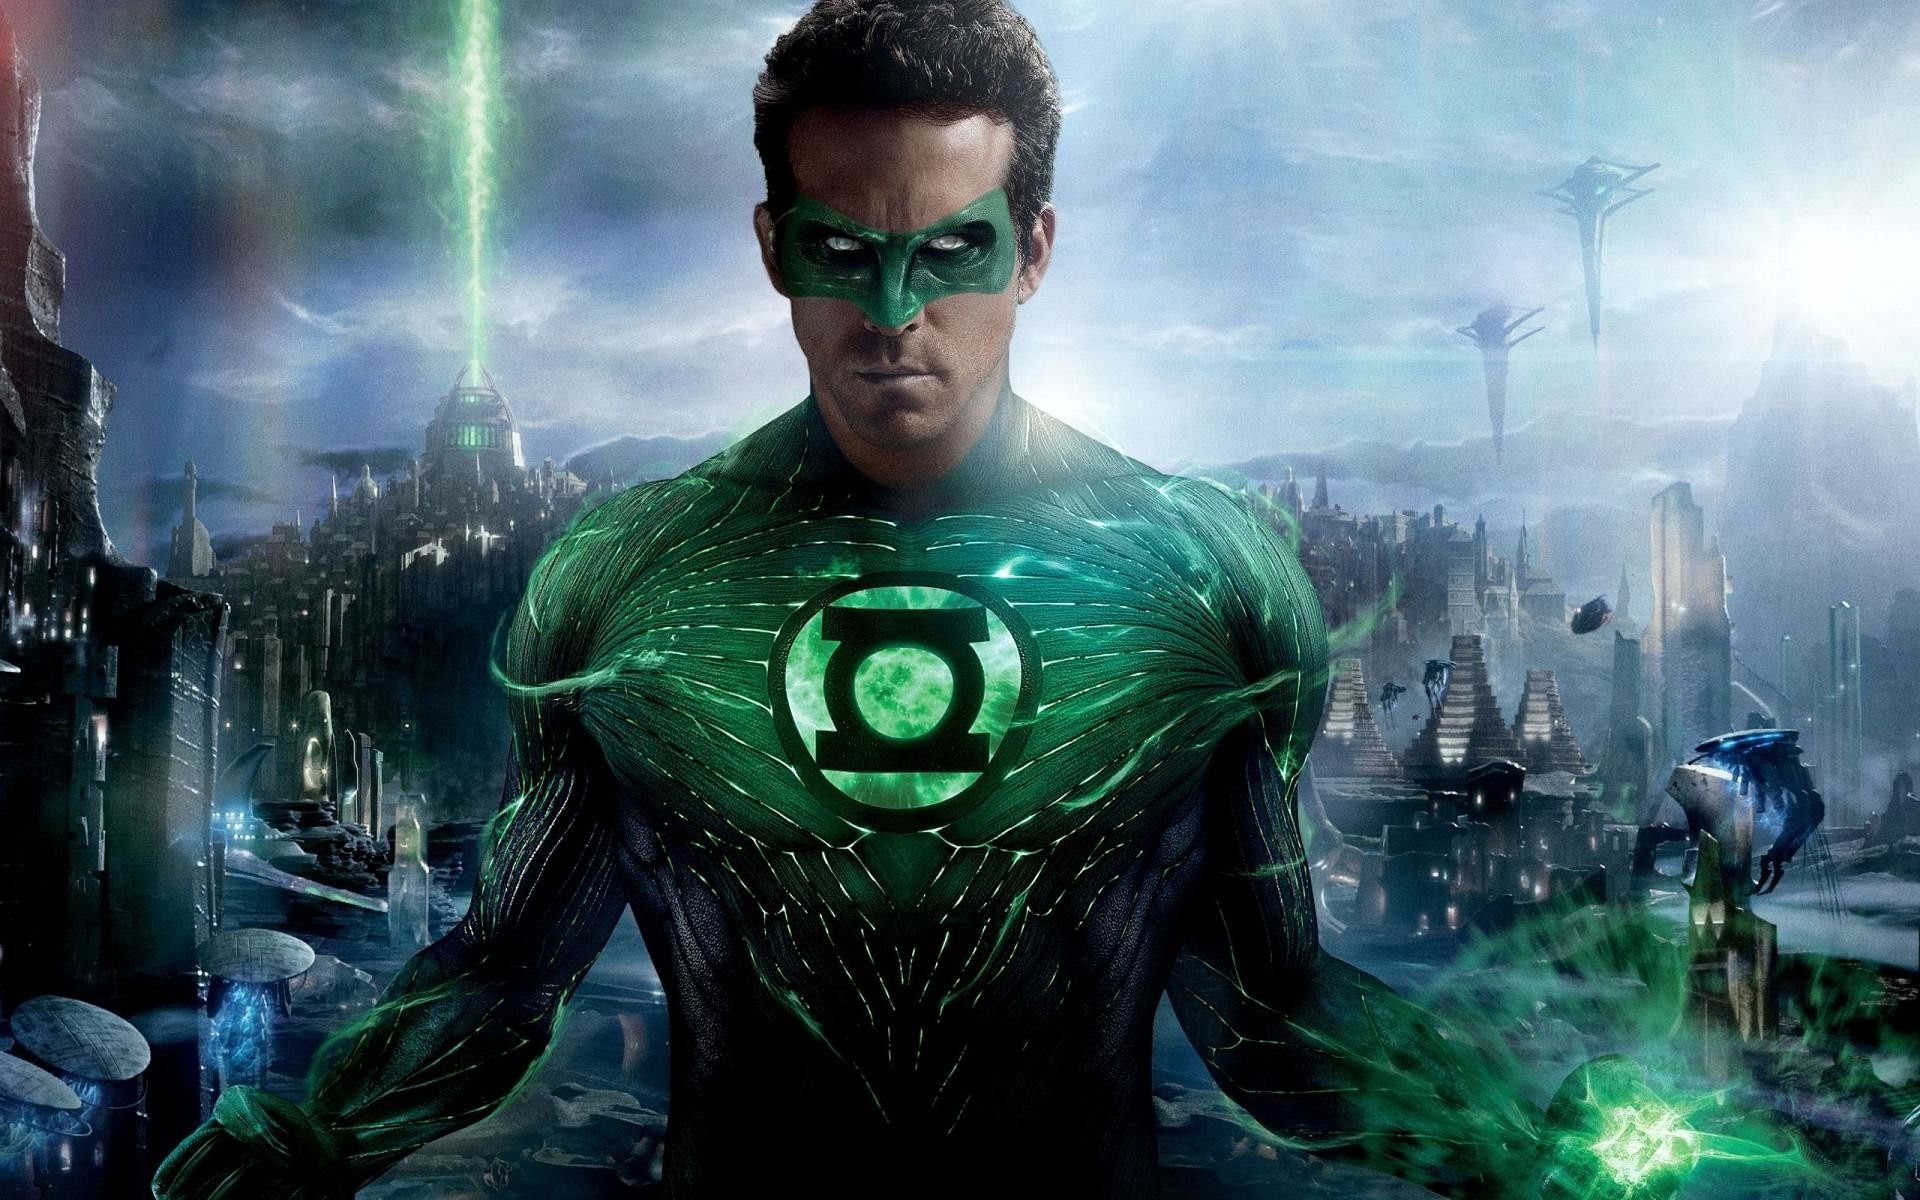 Why Isn't Green Lantern In 'Batman v. Superman'? The Justice